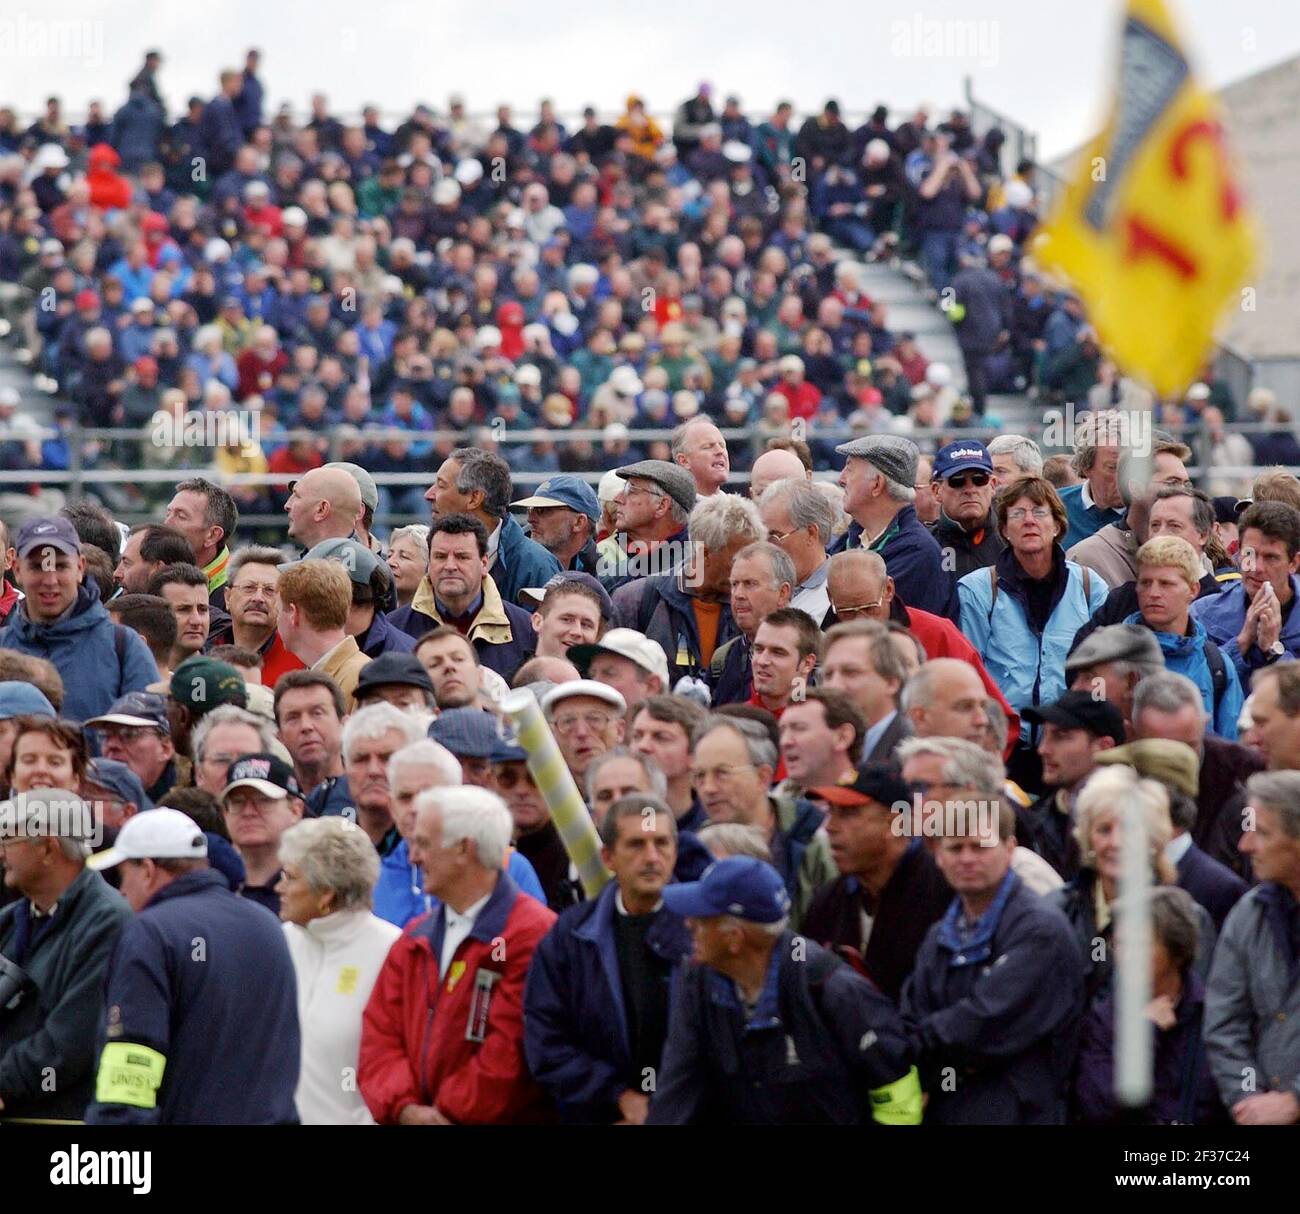 BRITISH OPEN GOLF CHAMPIONSHIP LYTHAM  JULY 2001 FANS  SUPPORTERS   GALLERY Stock Photo